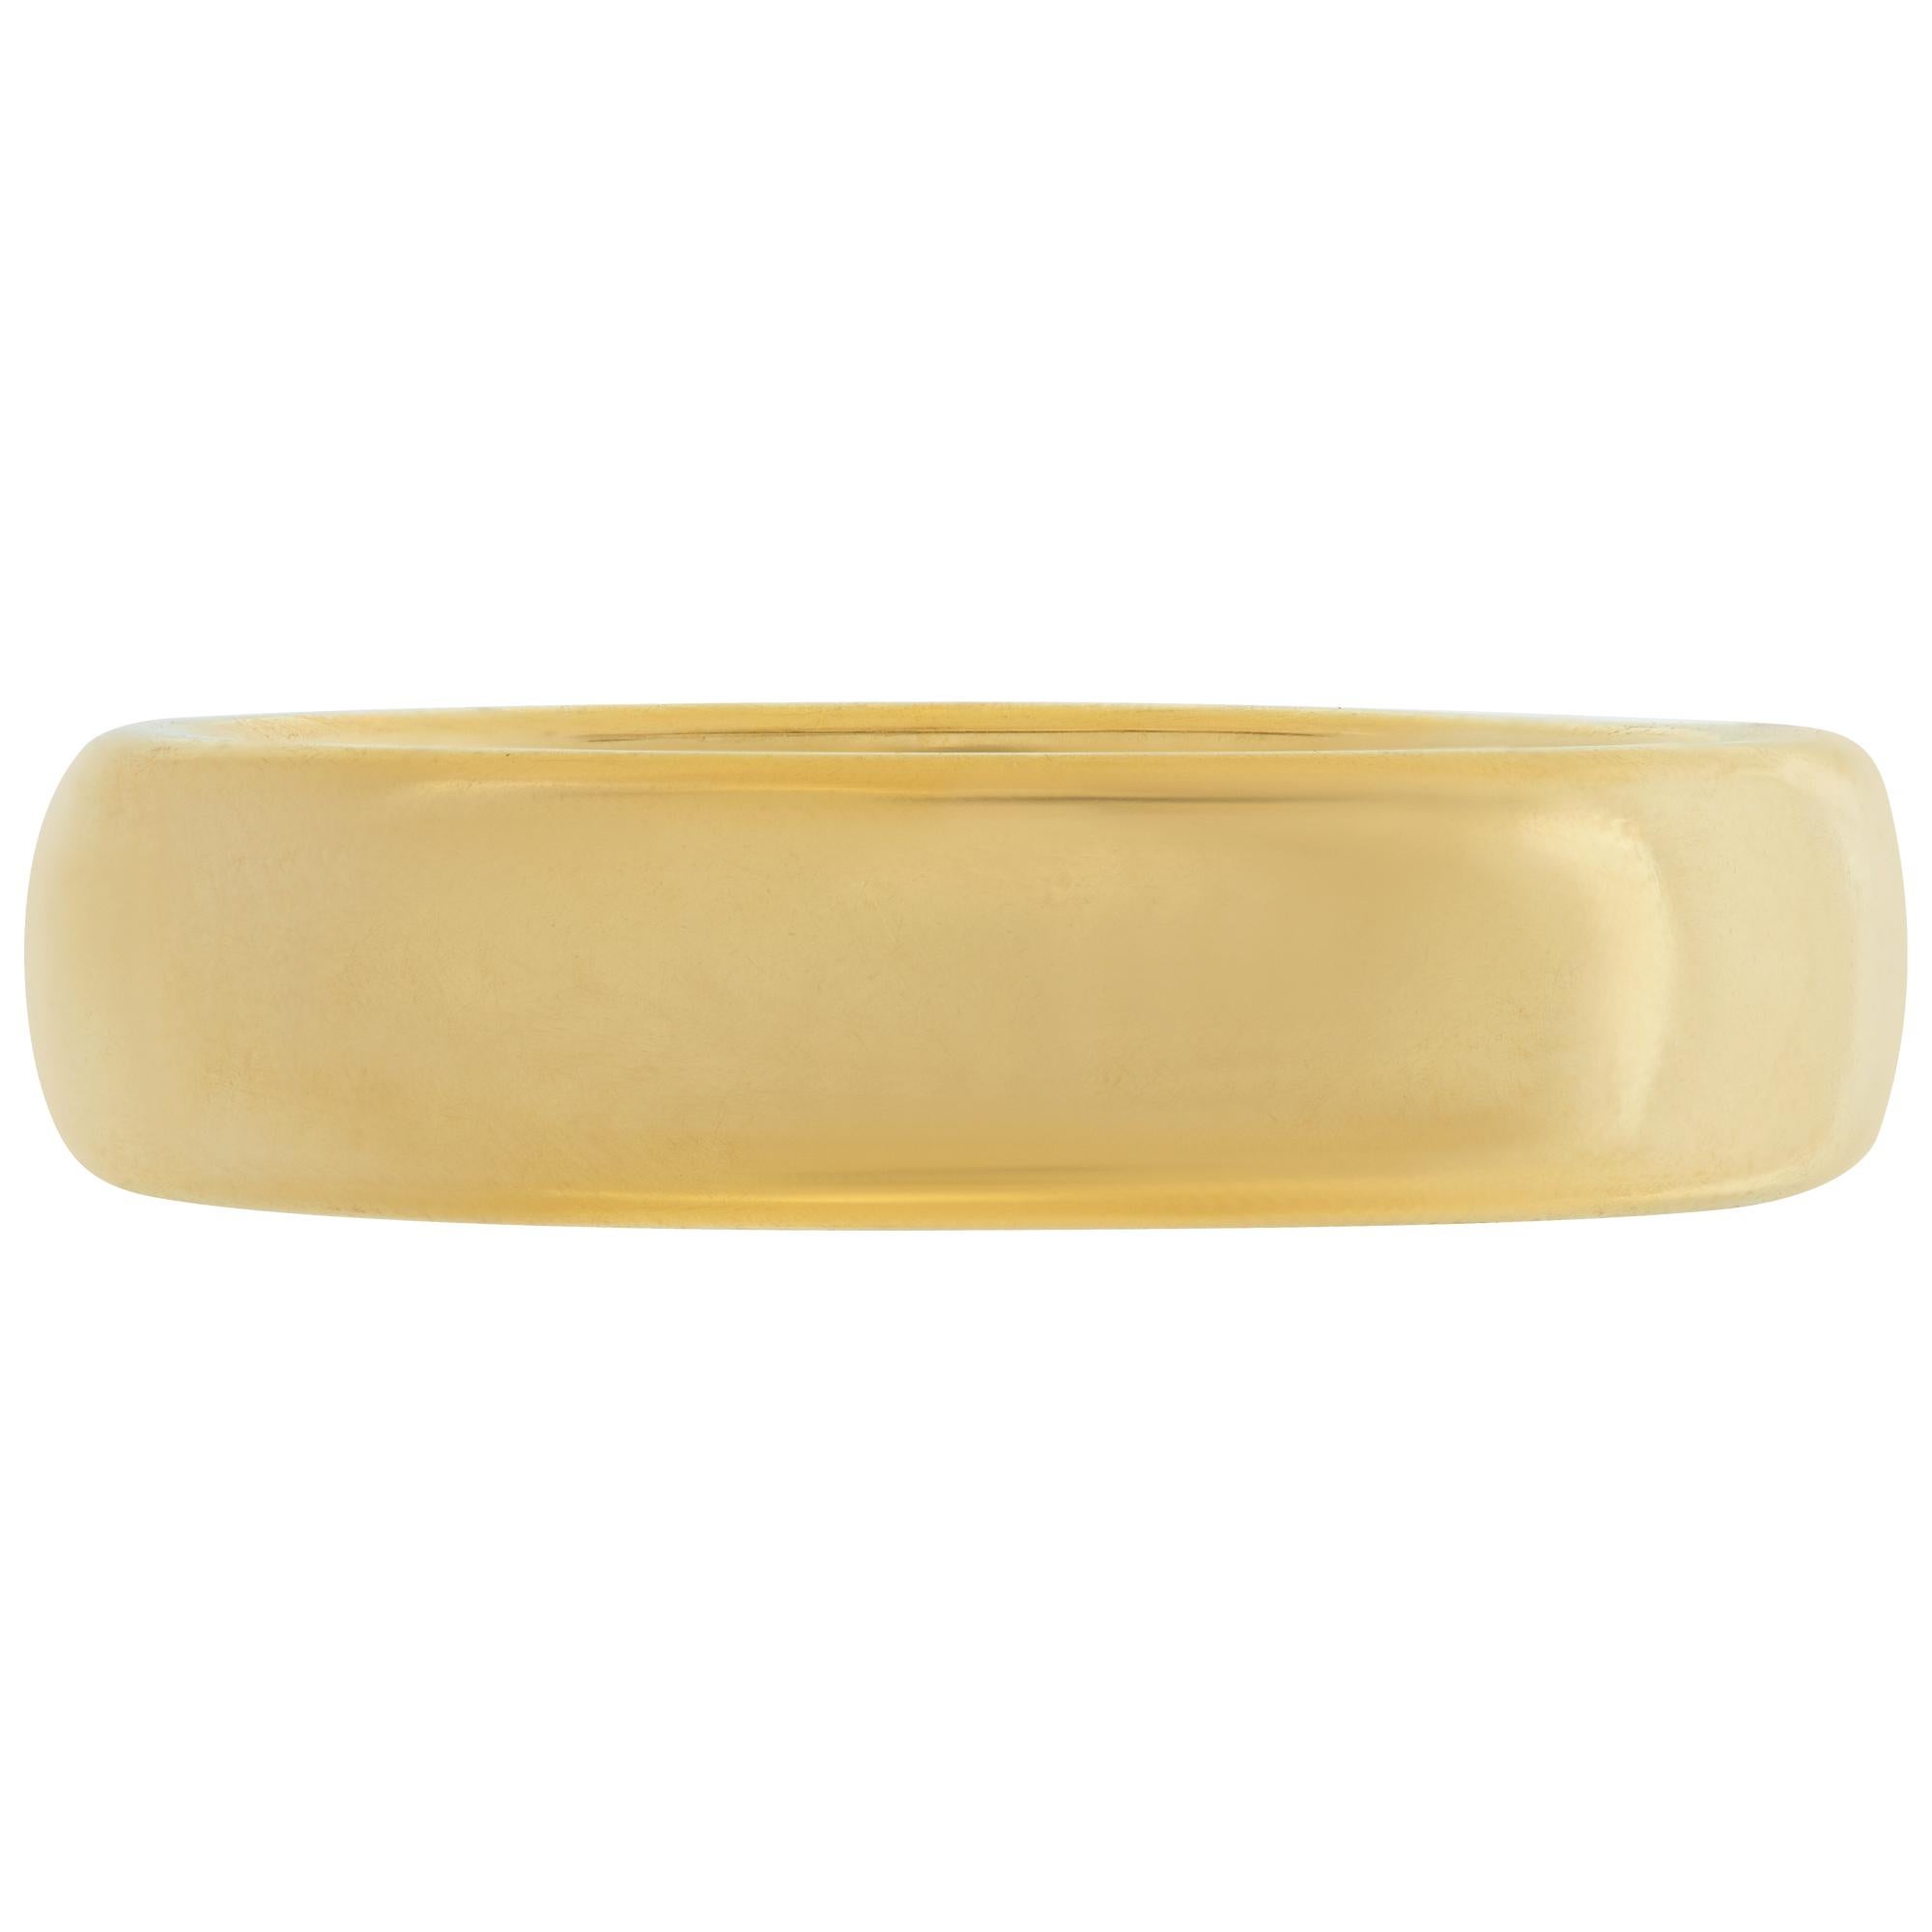 Tiffany & Co. Classic wedding band in 18k yellow gold, 4.5mm wide. Size 6.5.This Tiffany & Co. ring is currently size 4 and some items can be sized up or down, please ask! It weighs 3.5 pennyweights and is 18k.